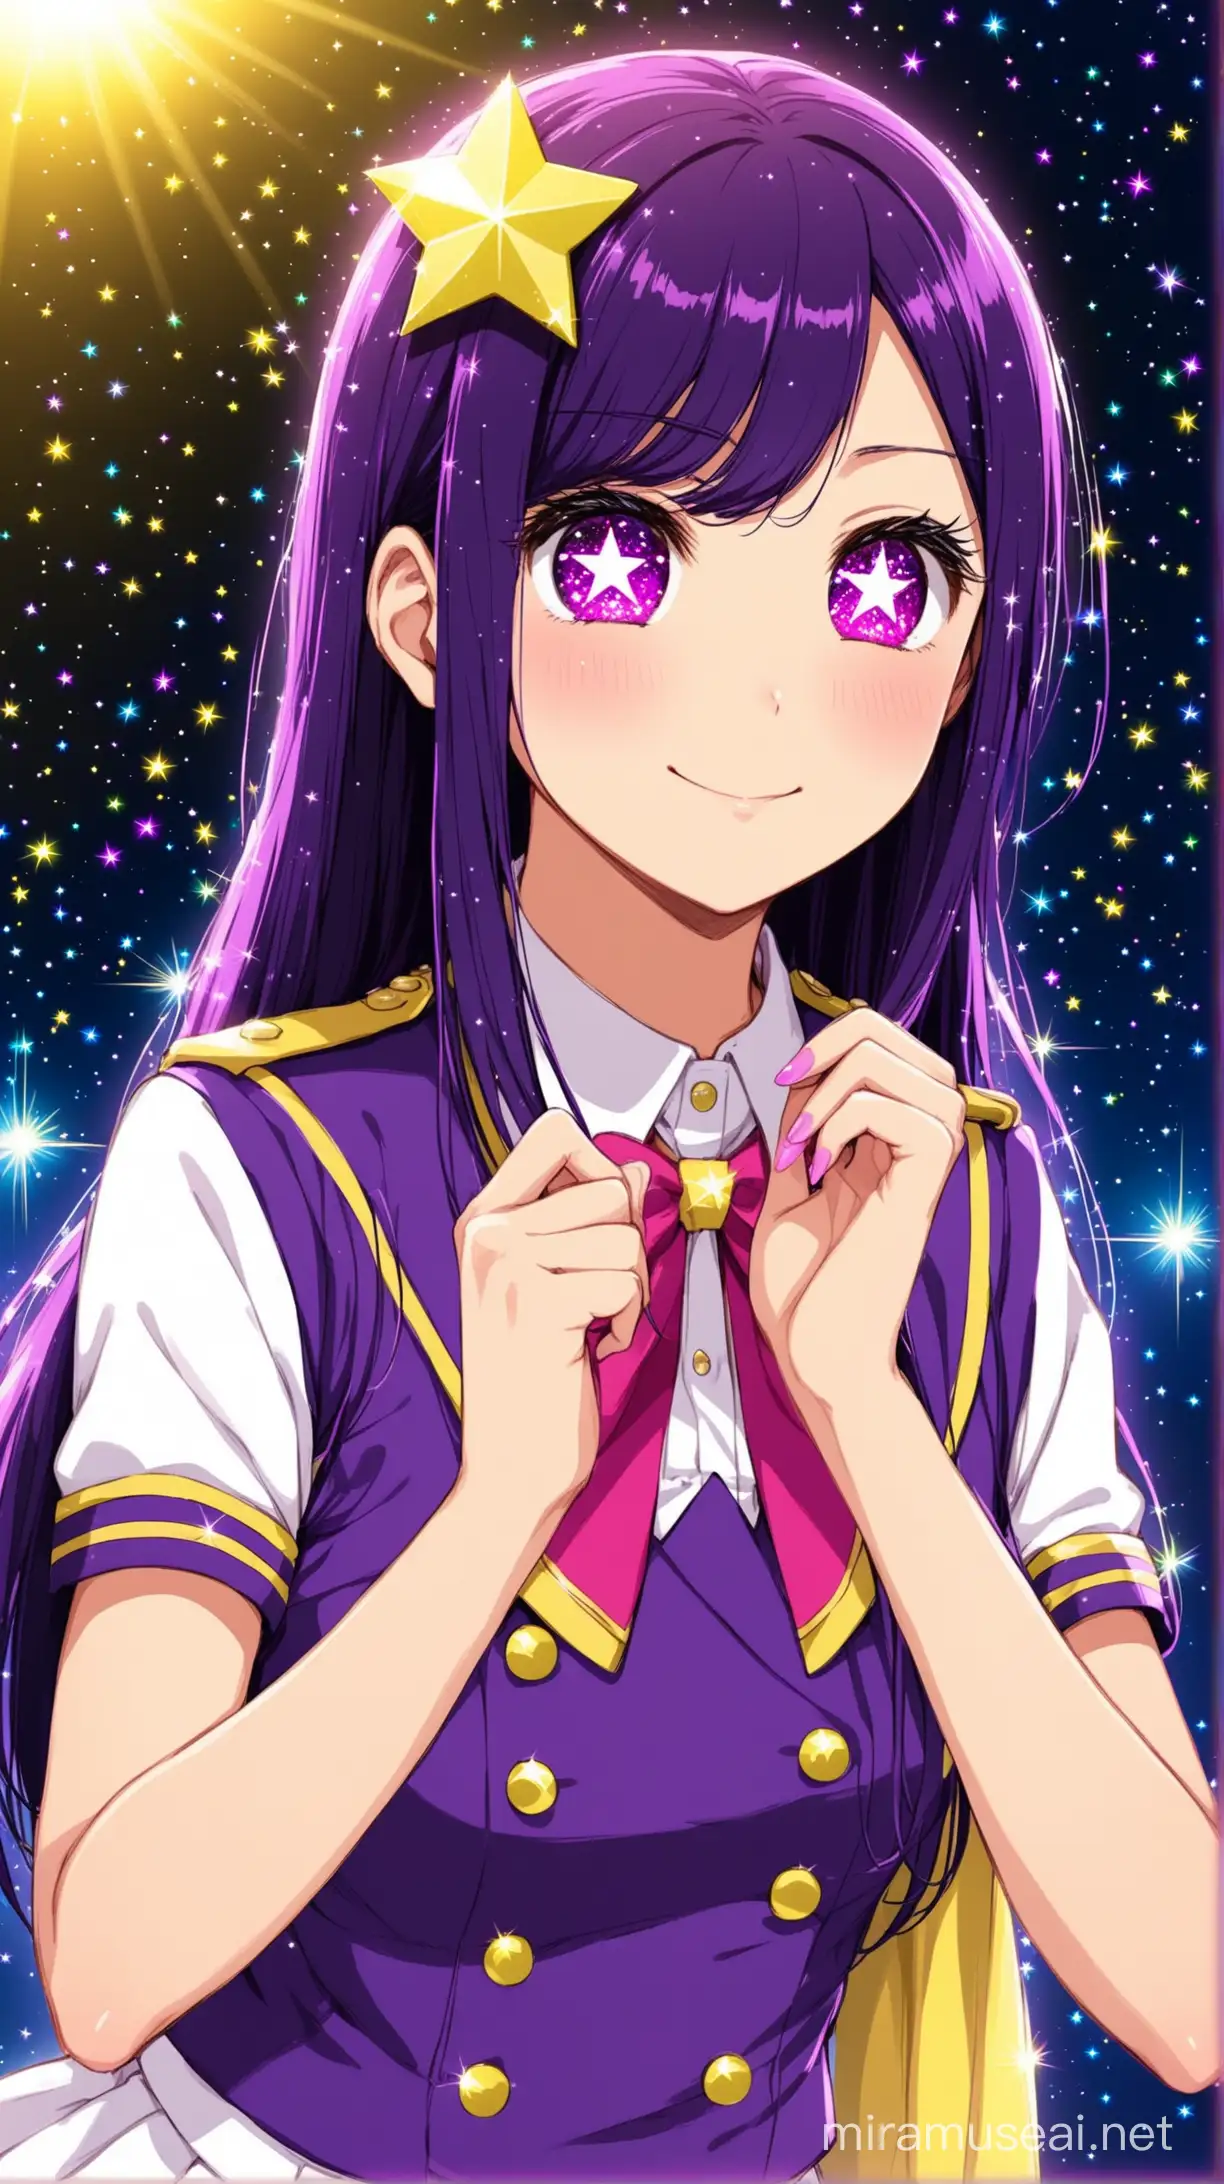 Idol Girl with Starry Eyes and Purple Hair in Uniform